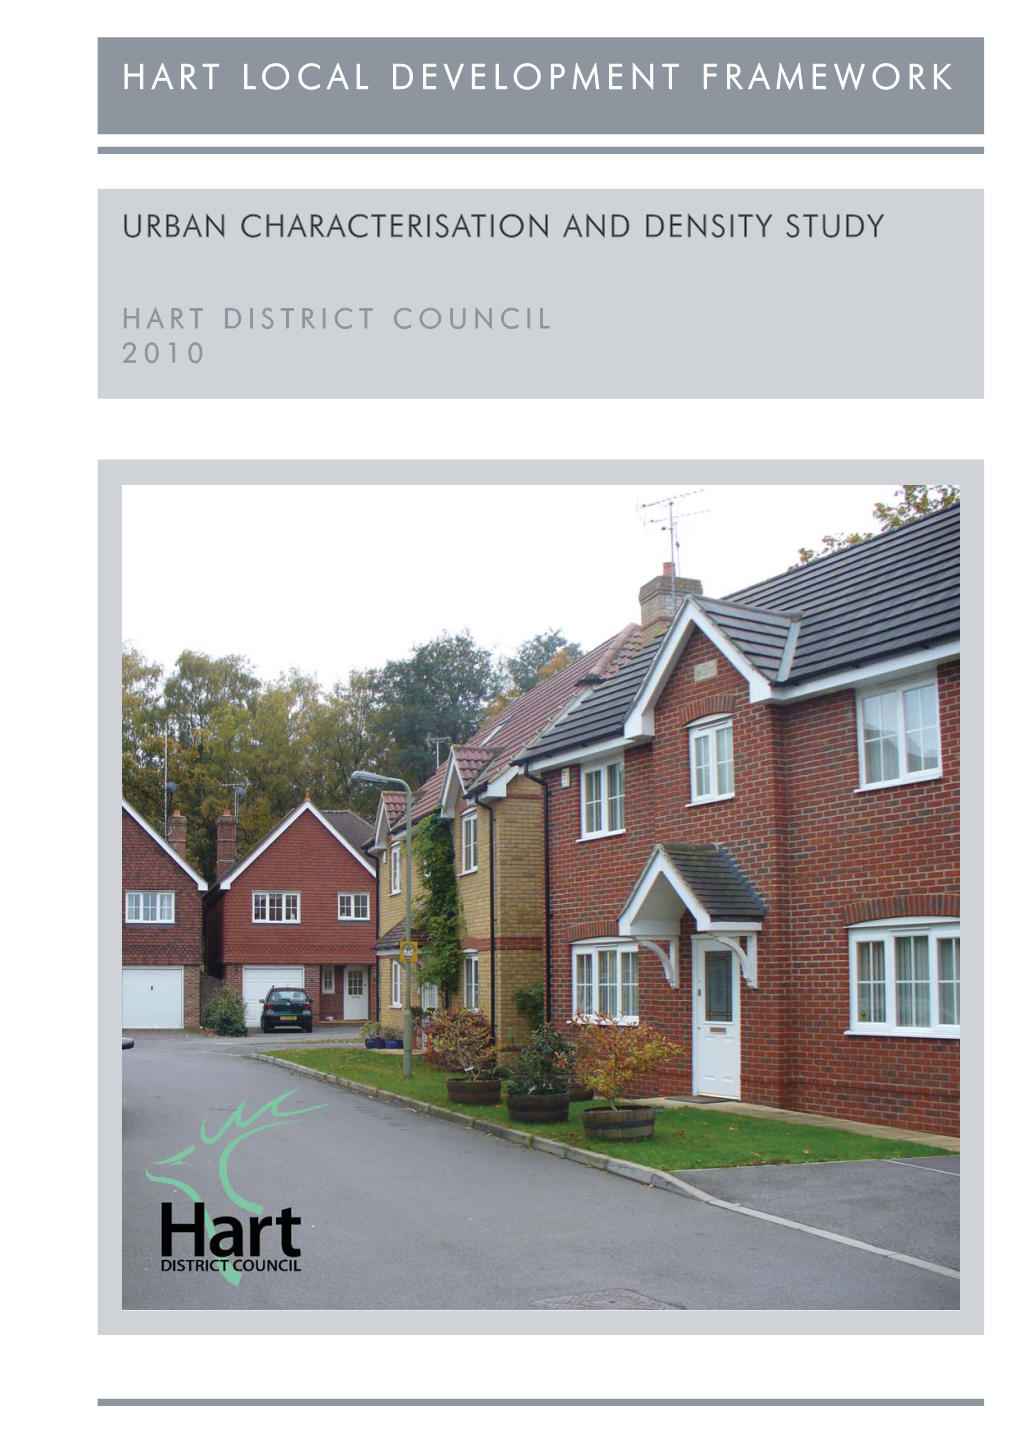 Urban Characterisation and Density Study